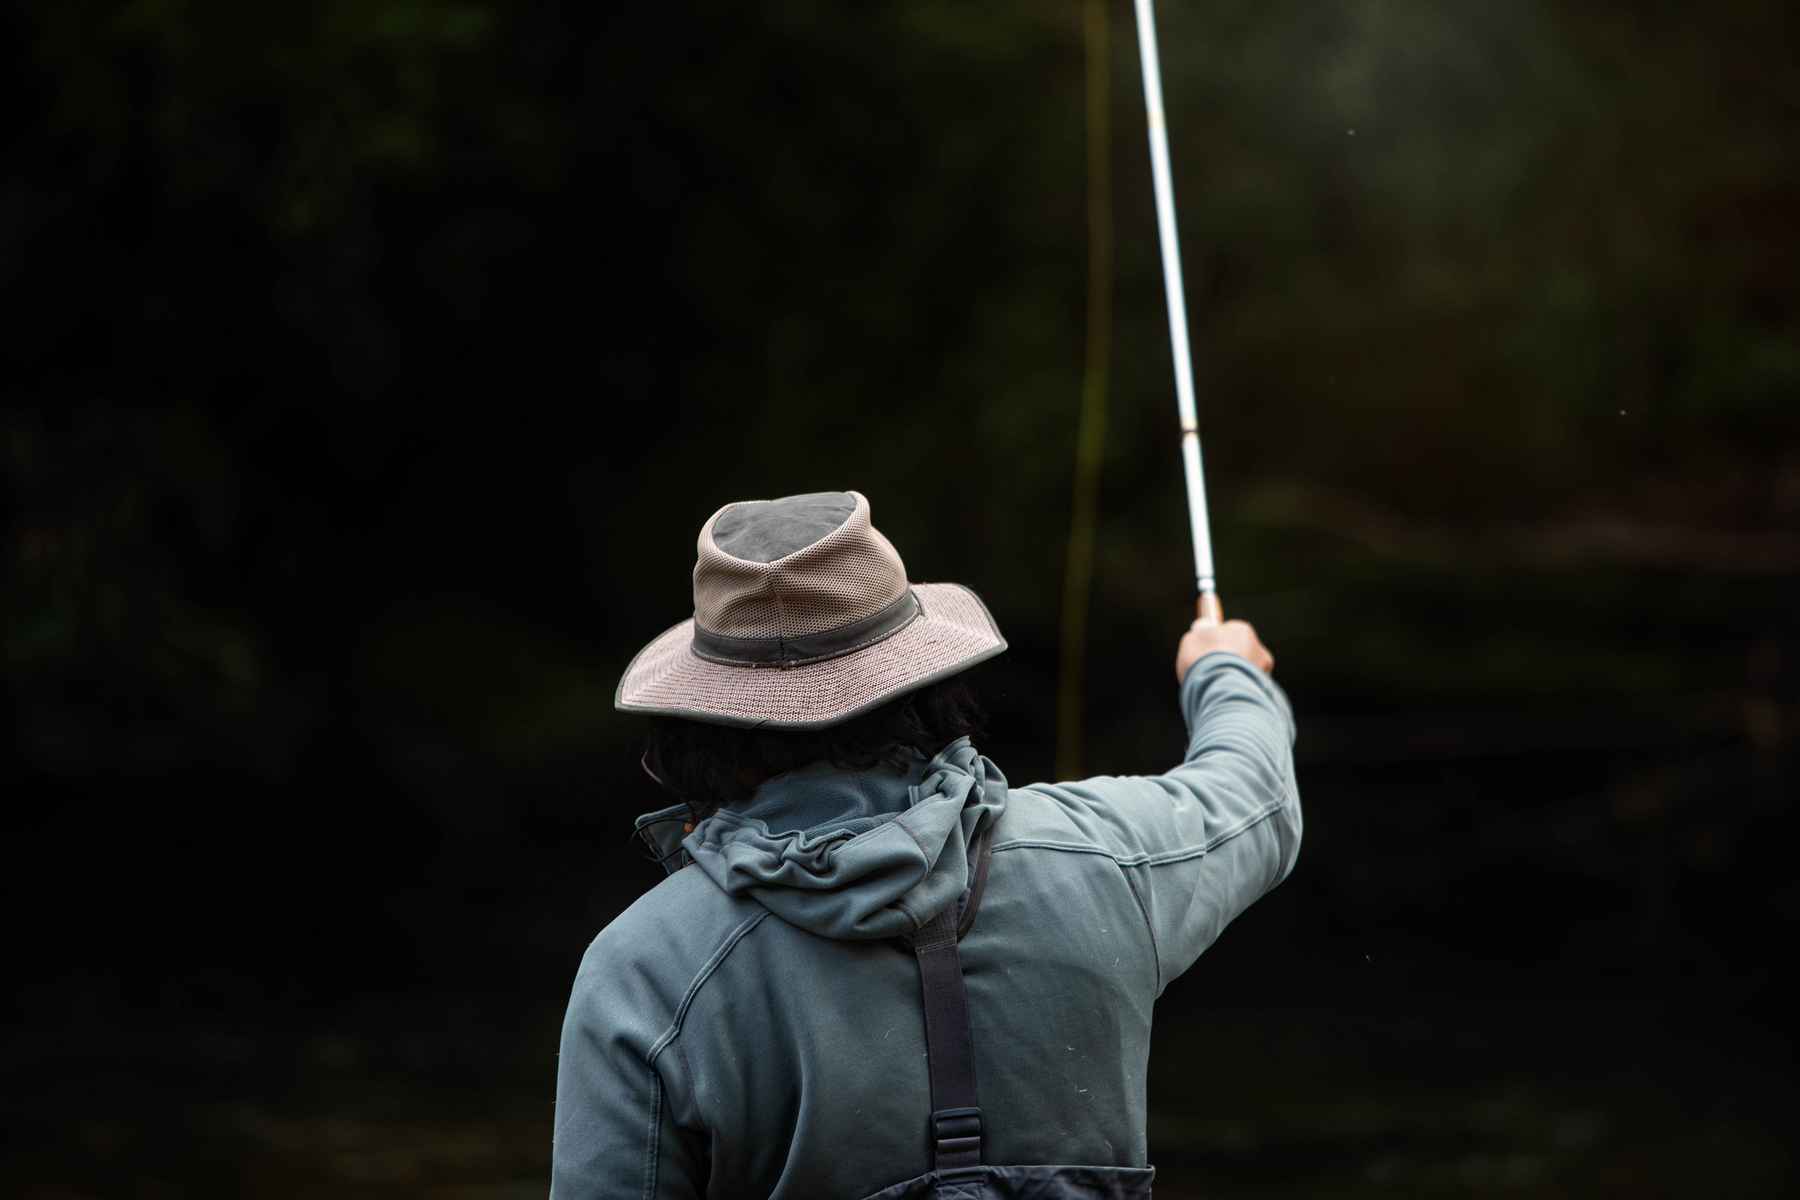 http://www.hatchmag.com/sites/default/files/styles/extra-large/public/field/image/_L5A9089.jpg